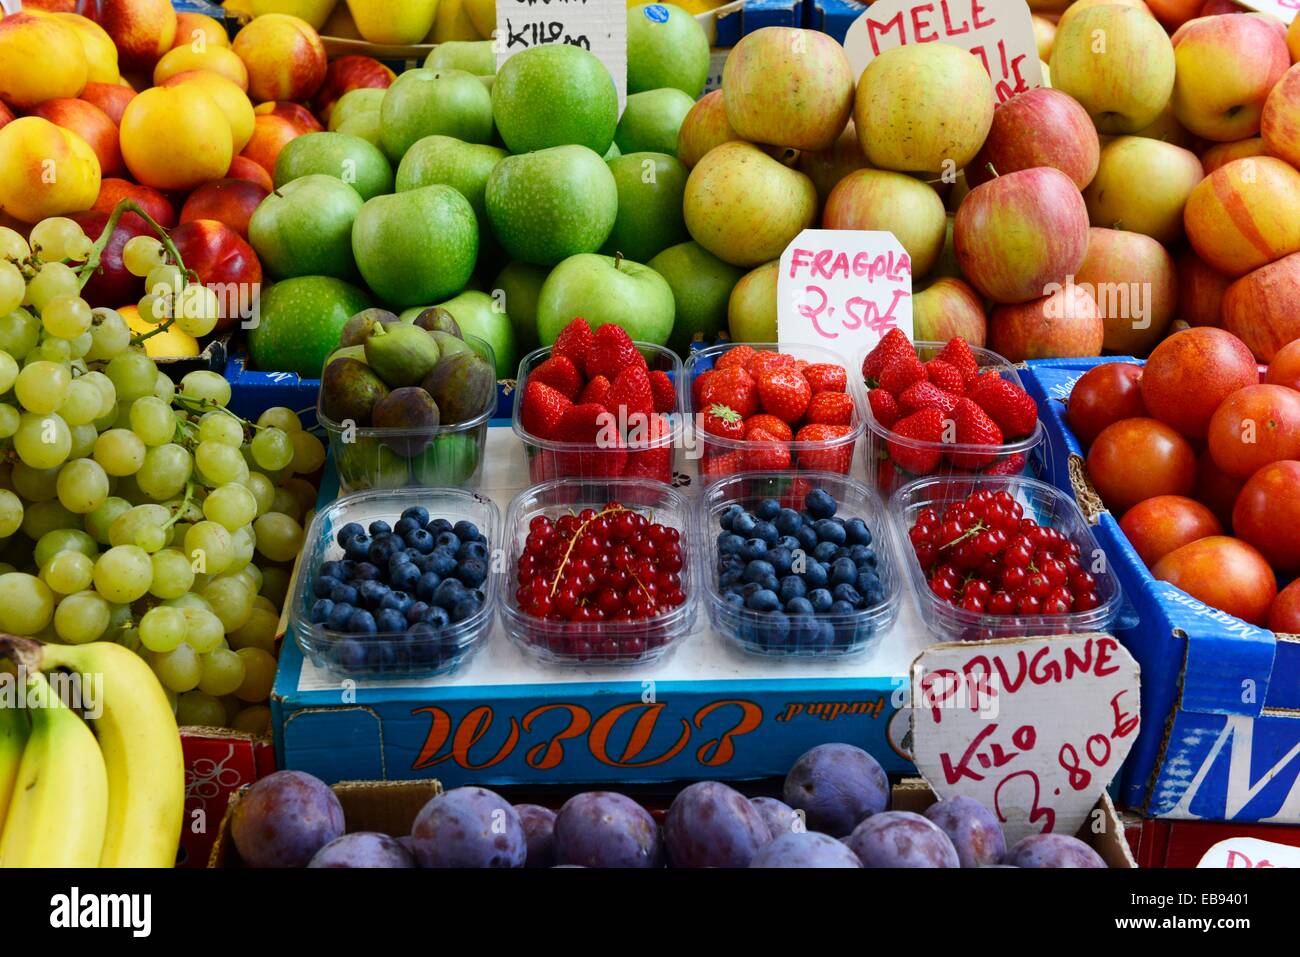 A colorful array of fruits and vegetable displayed for sale at the market in Venice,Italy,Europe Stock Photo